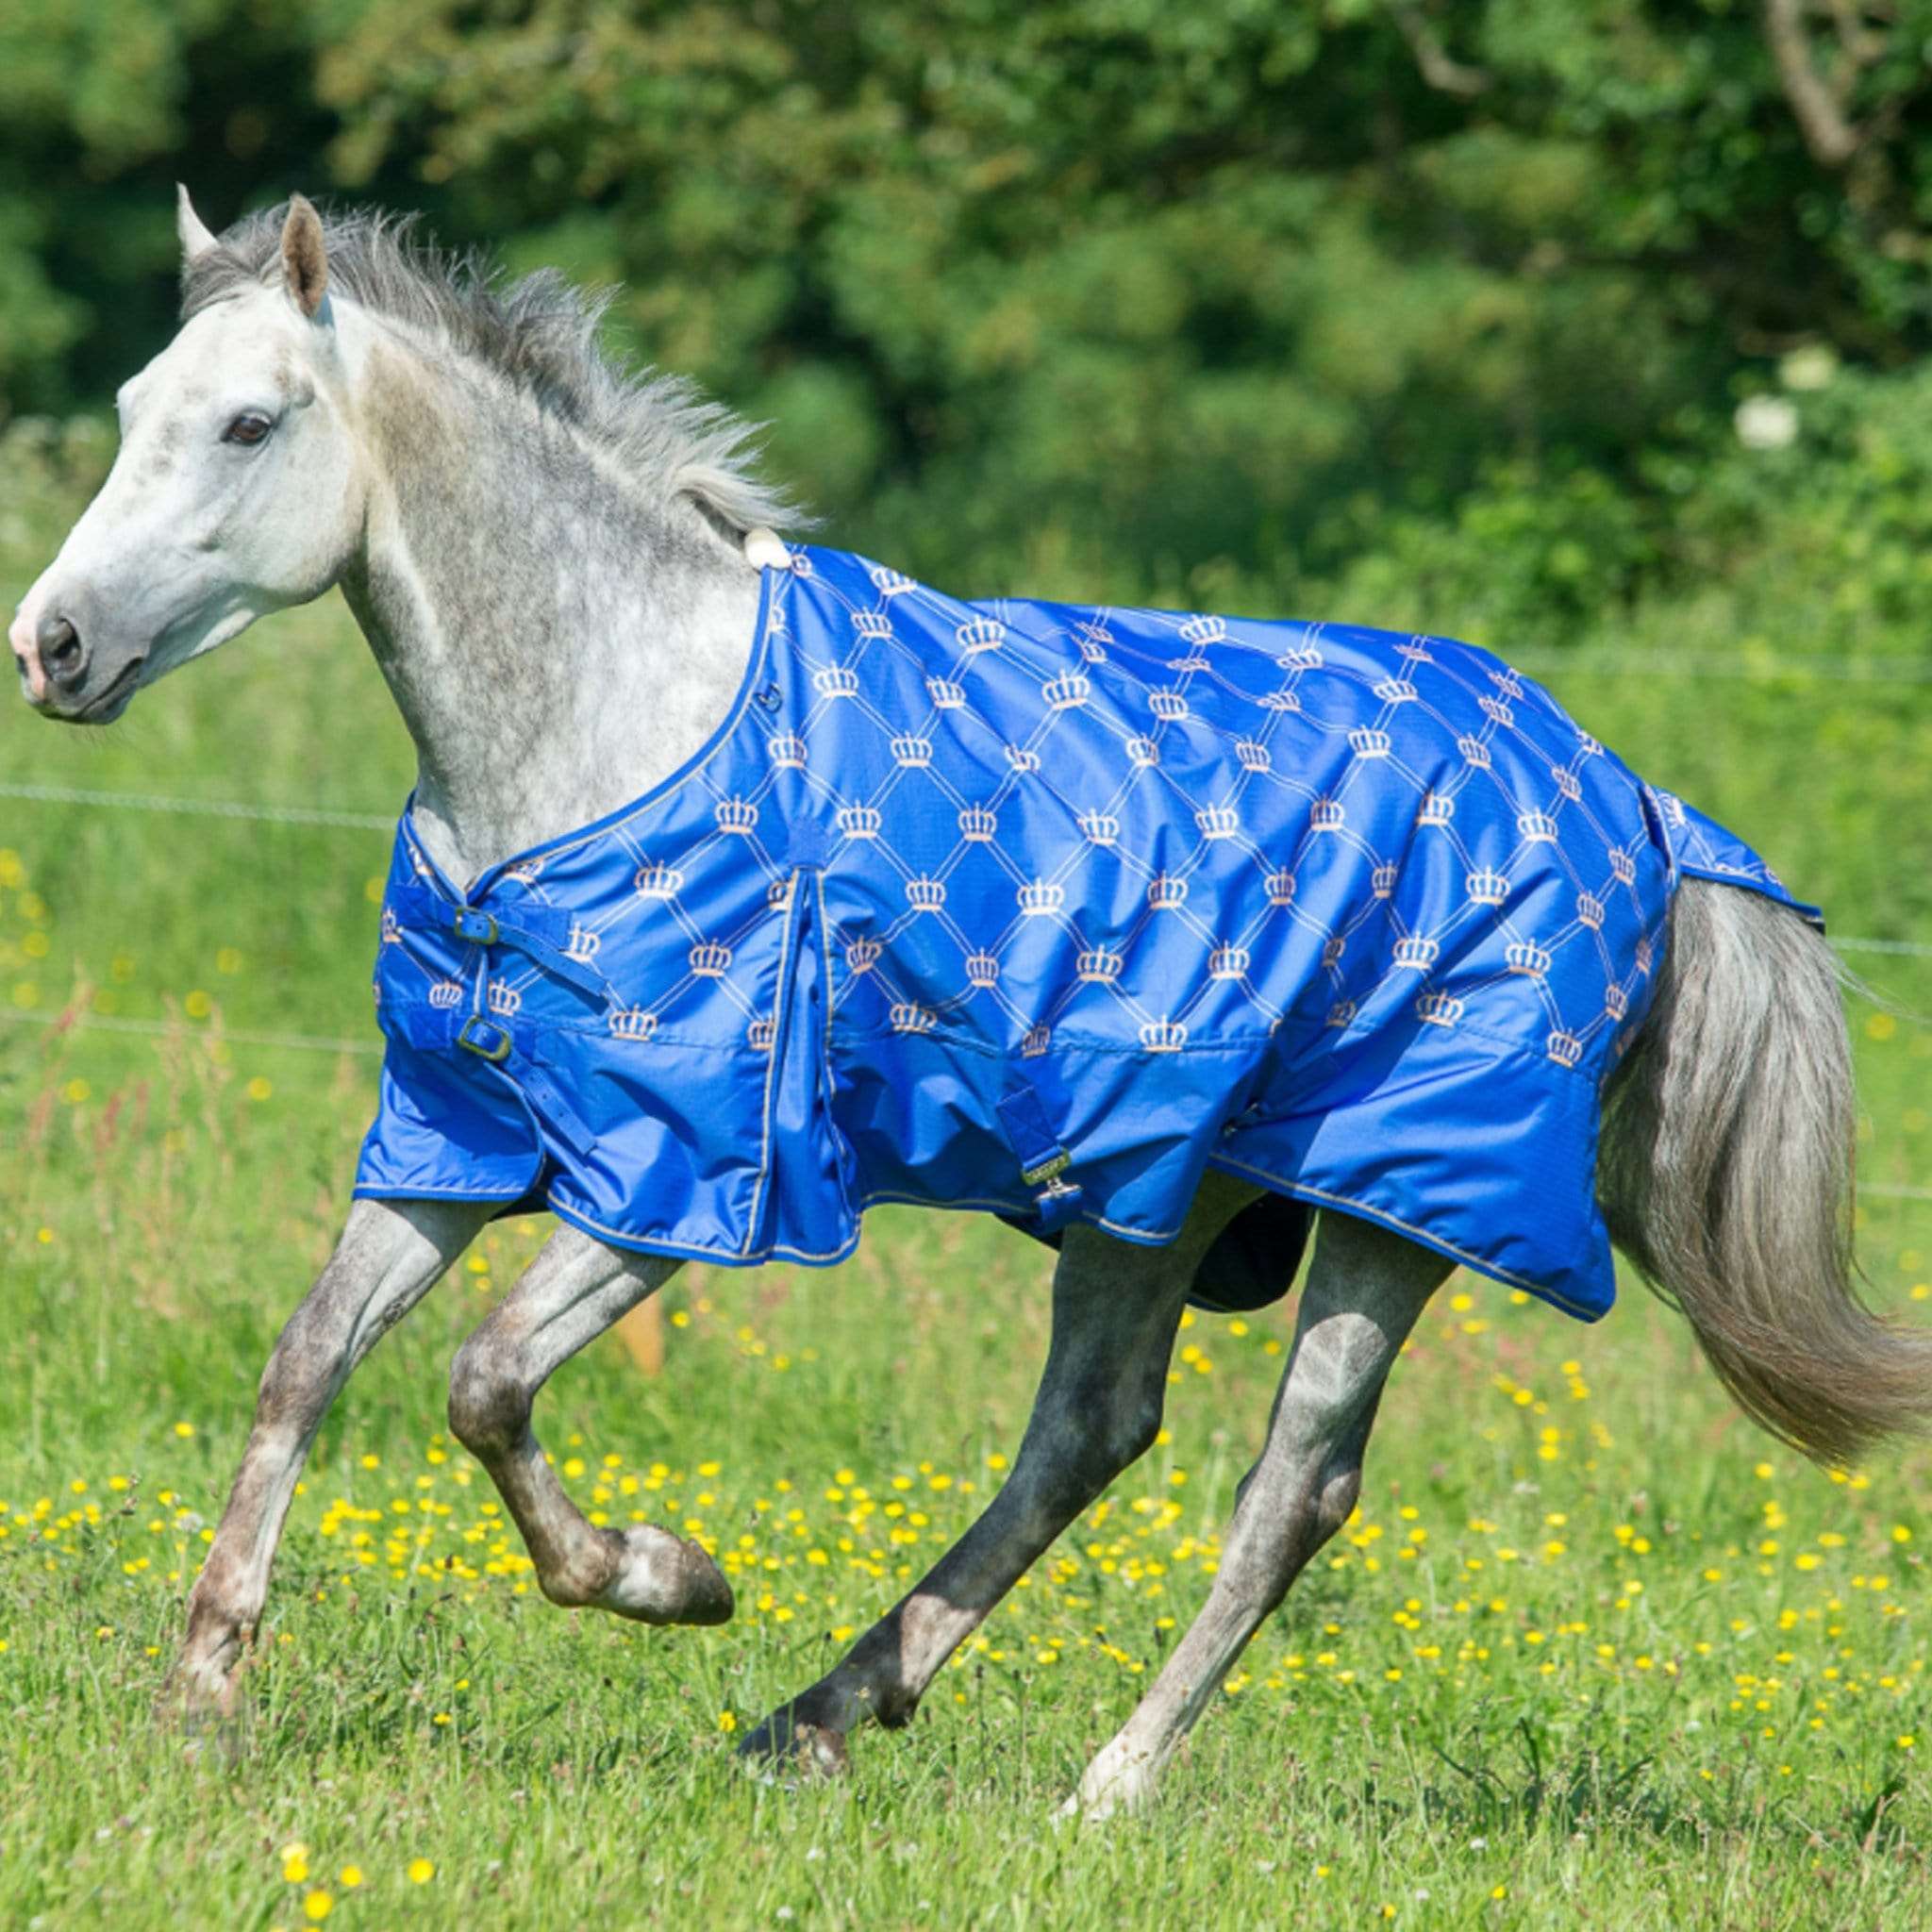 Best lightweight turnout rugs for horses image features Trojan Turnout rug in blue with printed crown